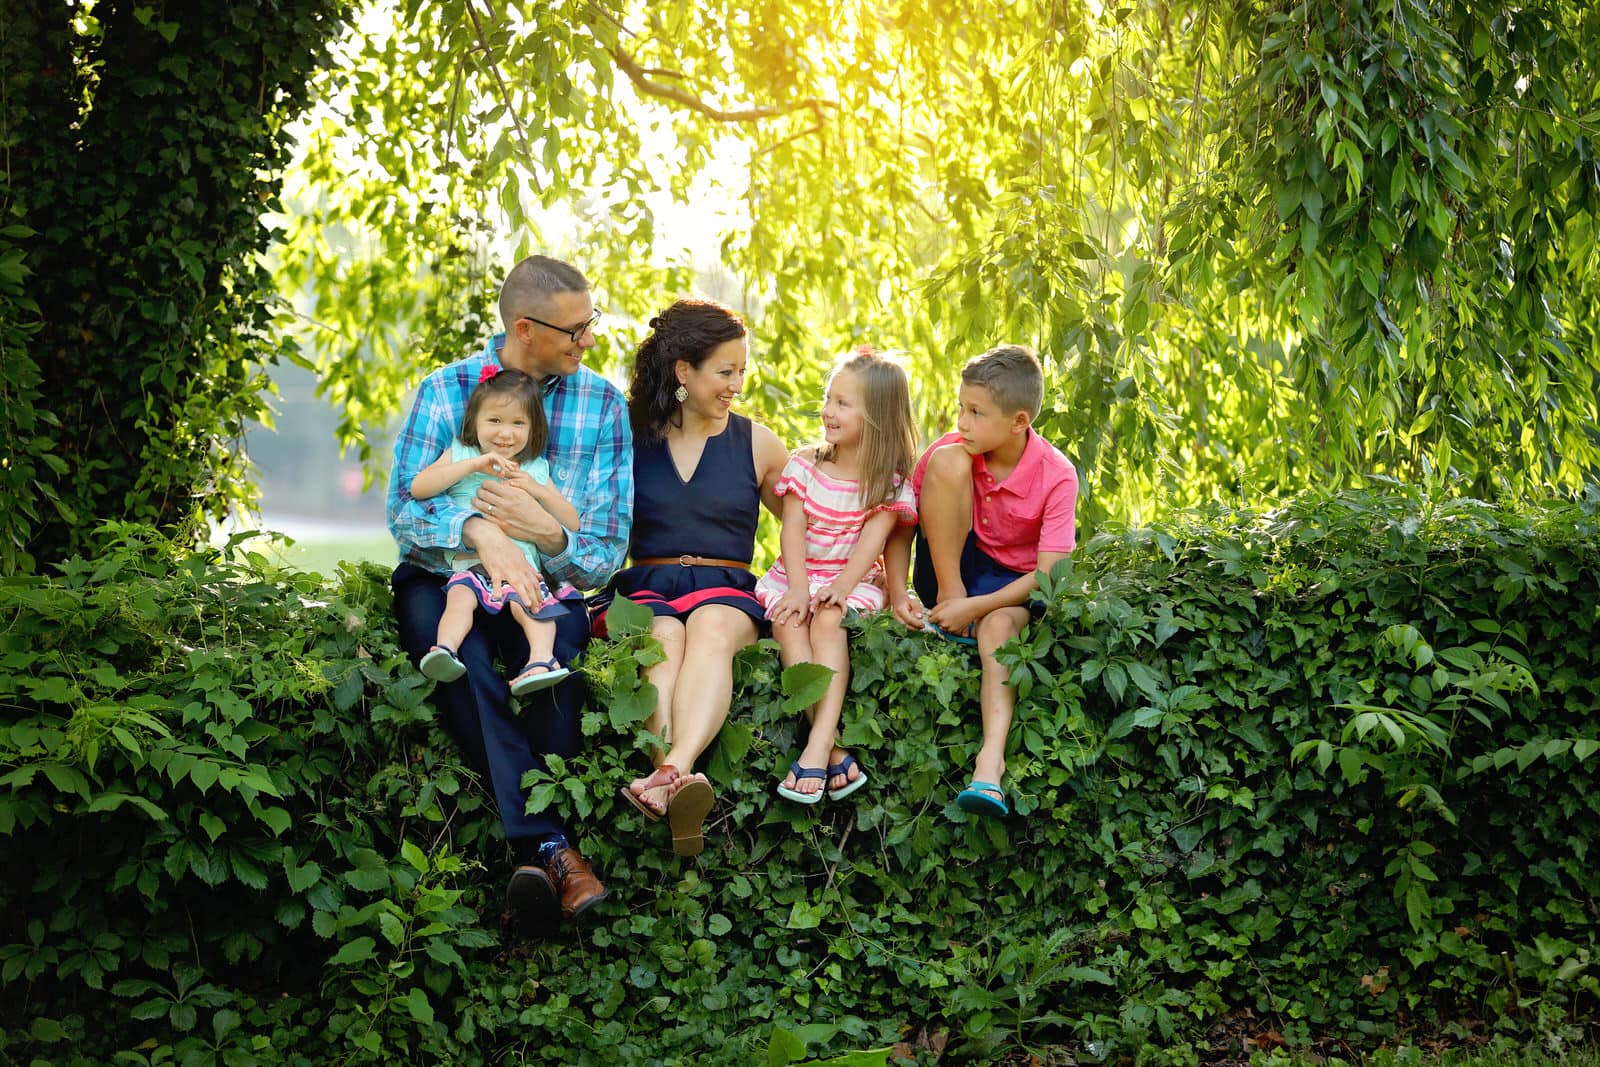 karissa zimmer photography captures a family portrait during a spring session